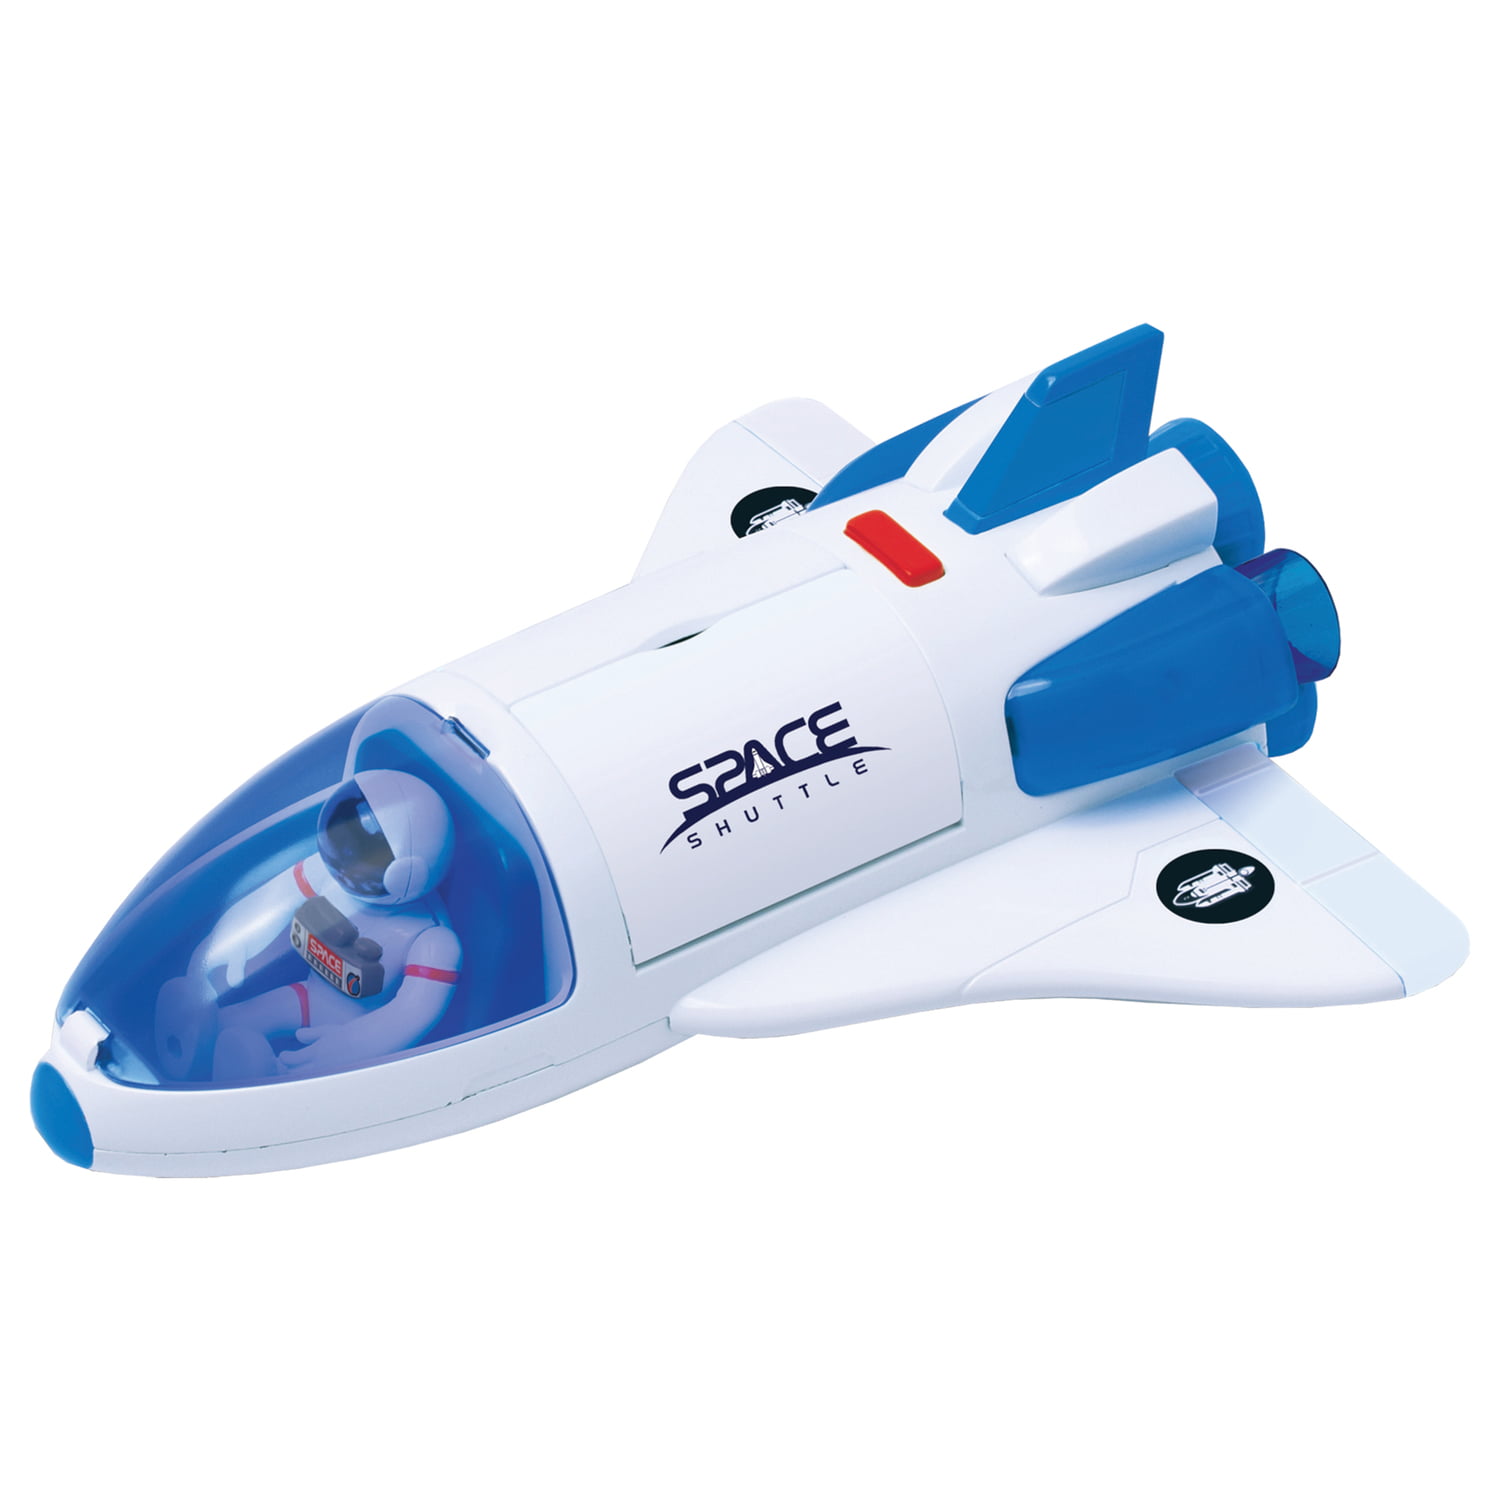 SPACE SHUTTLE MODELFRICTION TOY  PULL BACK ACTIONDIE-CAST 7.5 INCHES LONG 